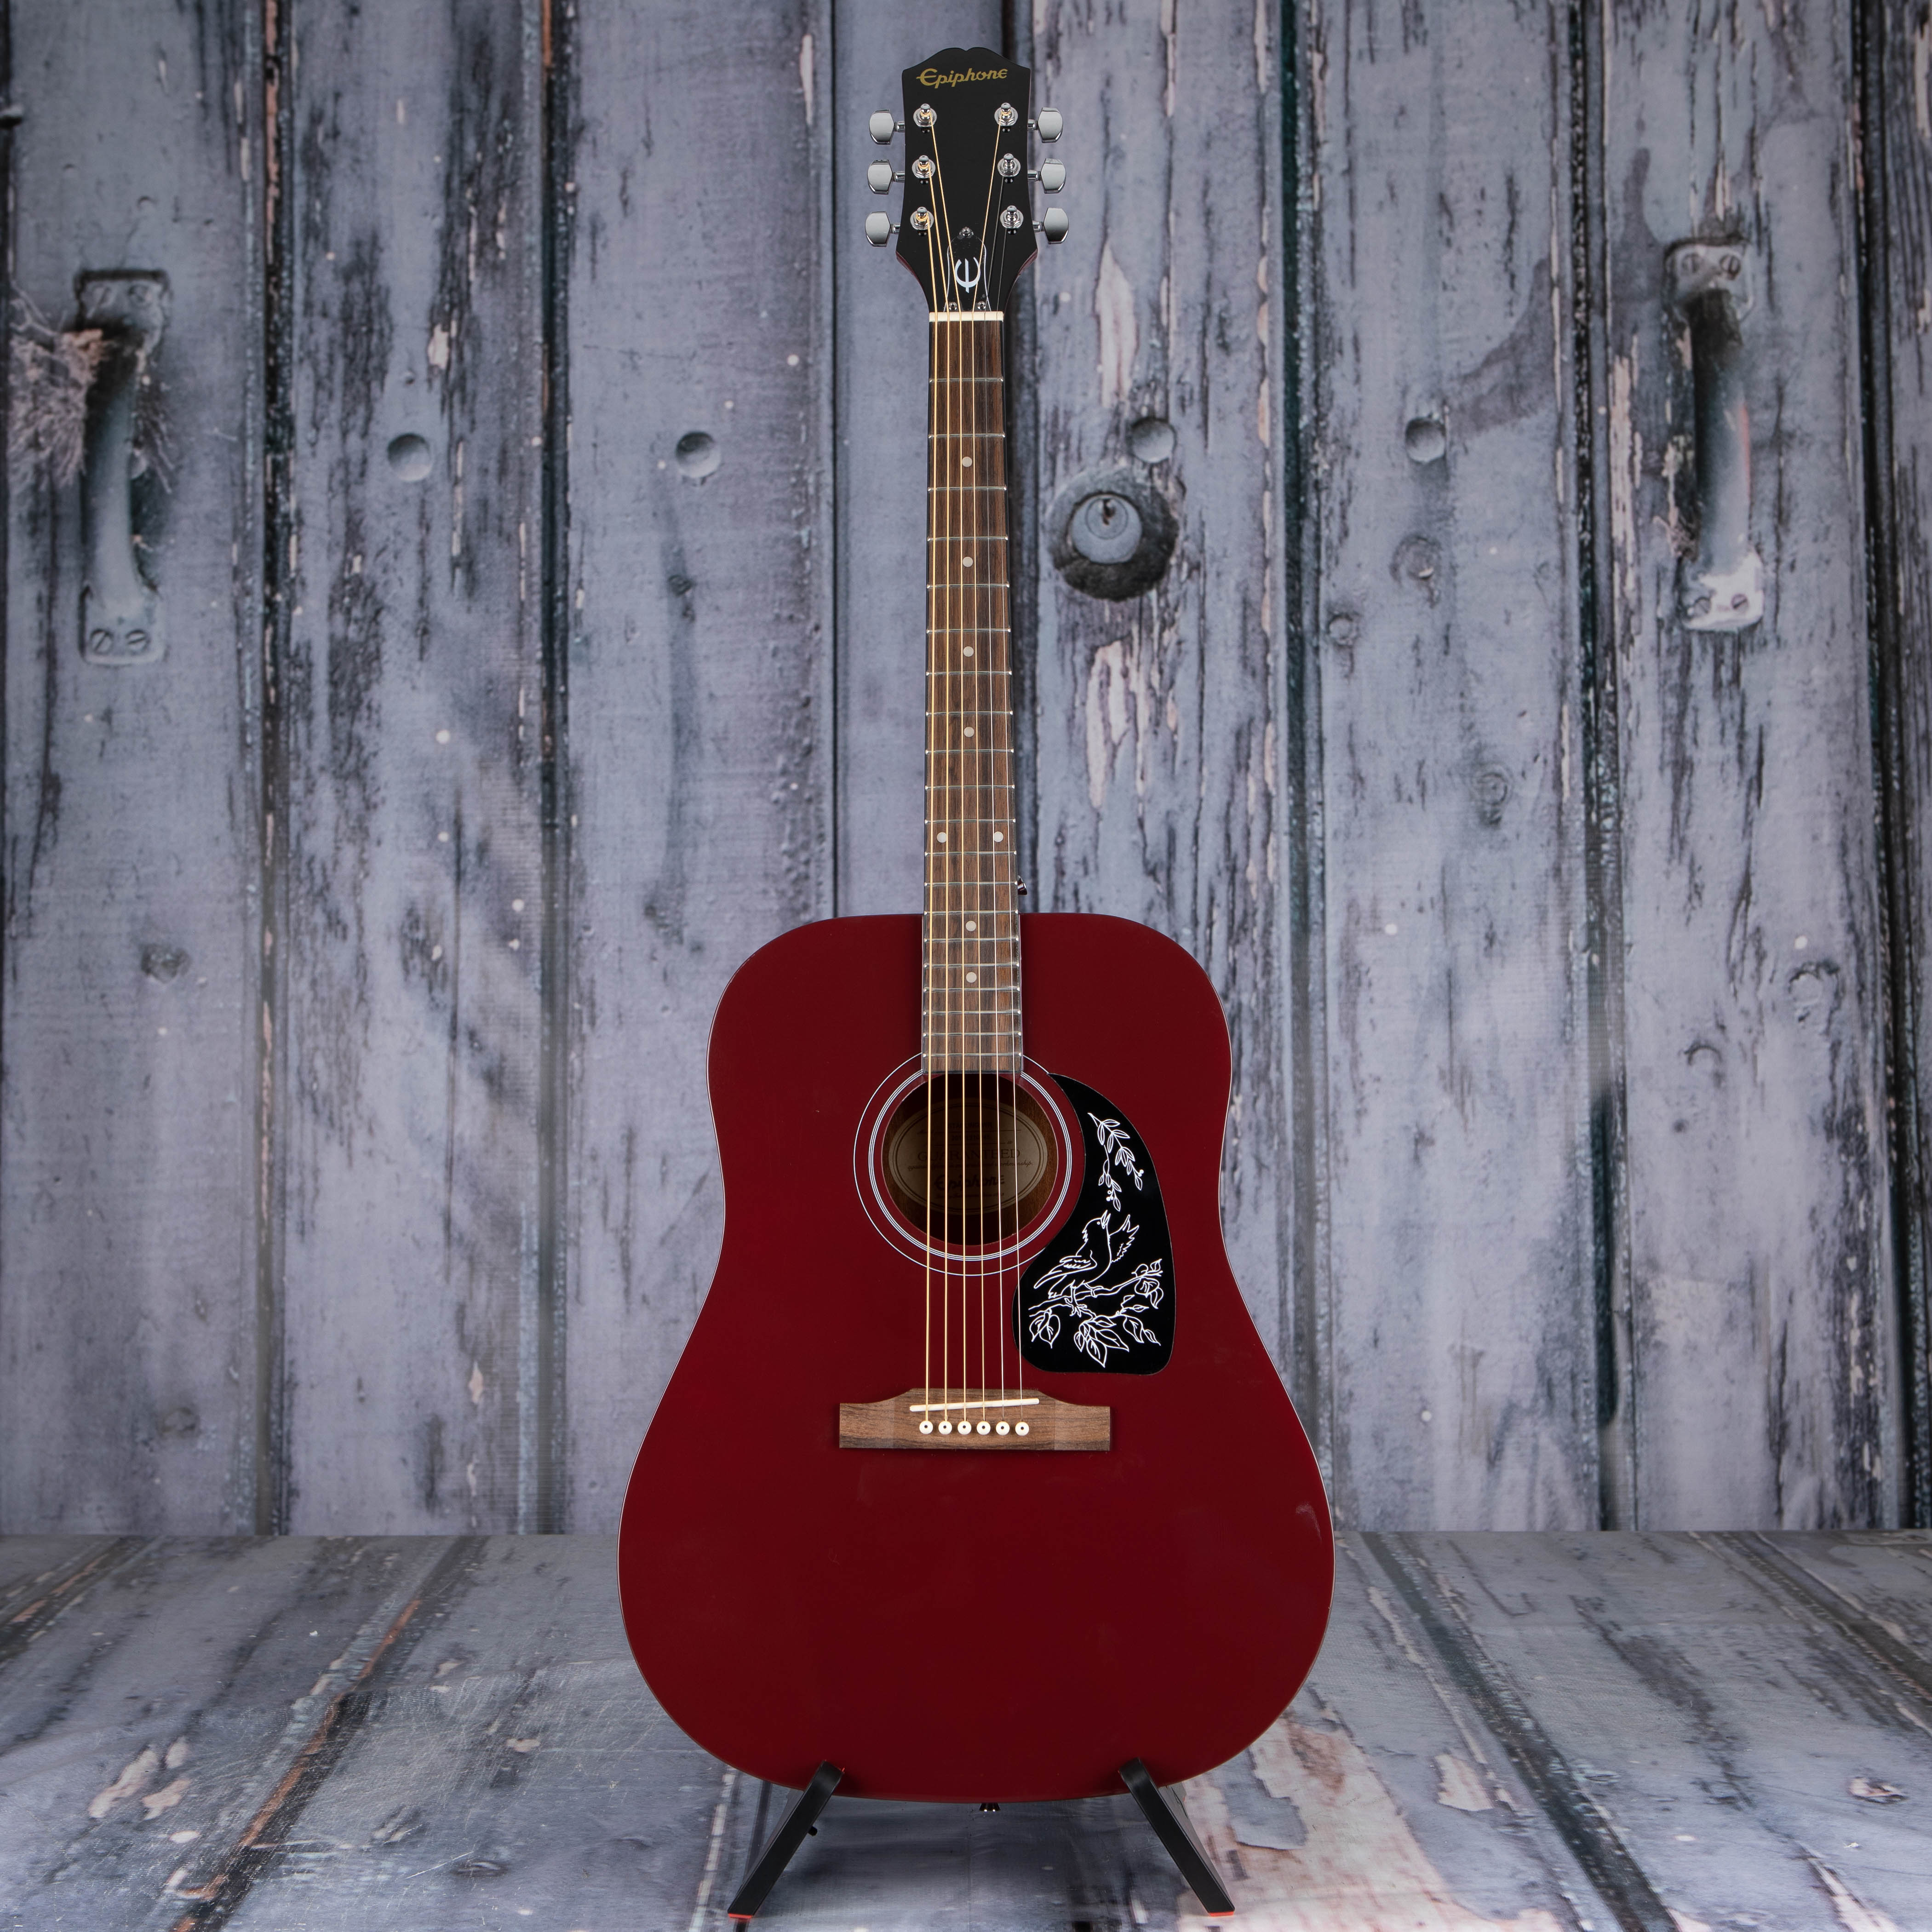 Epiphone Starling Acoustic Guitar, Wine Red, front